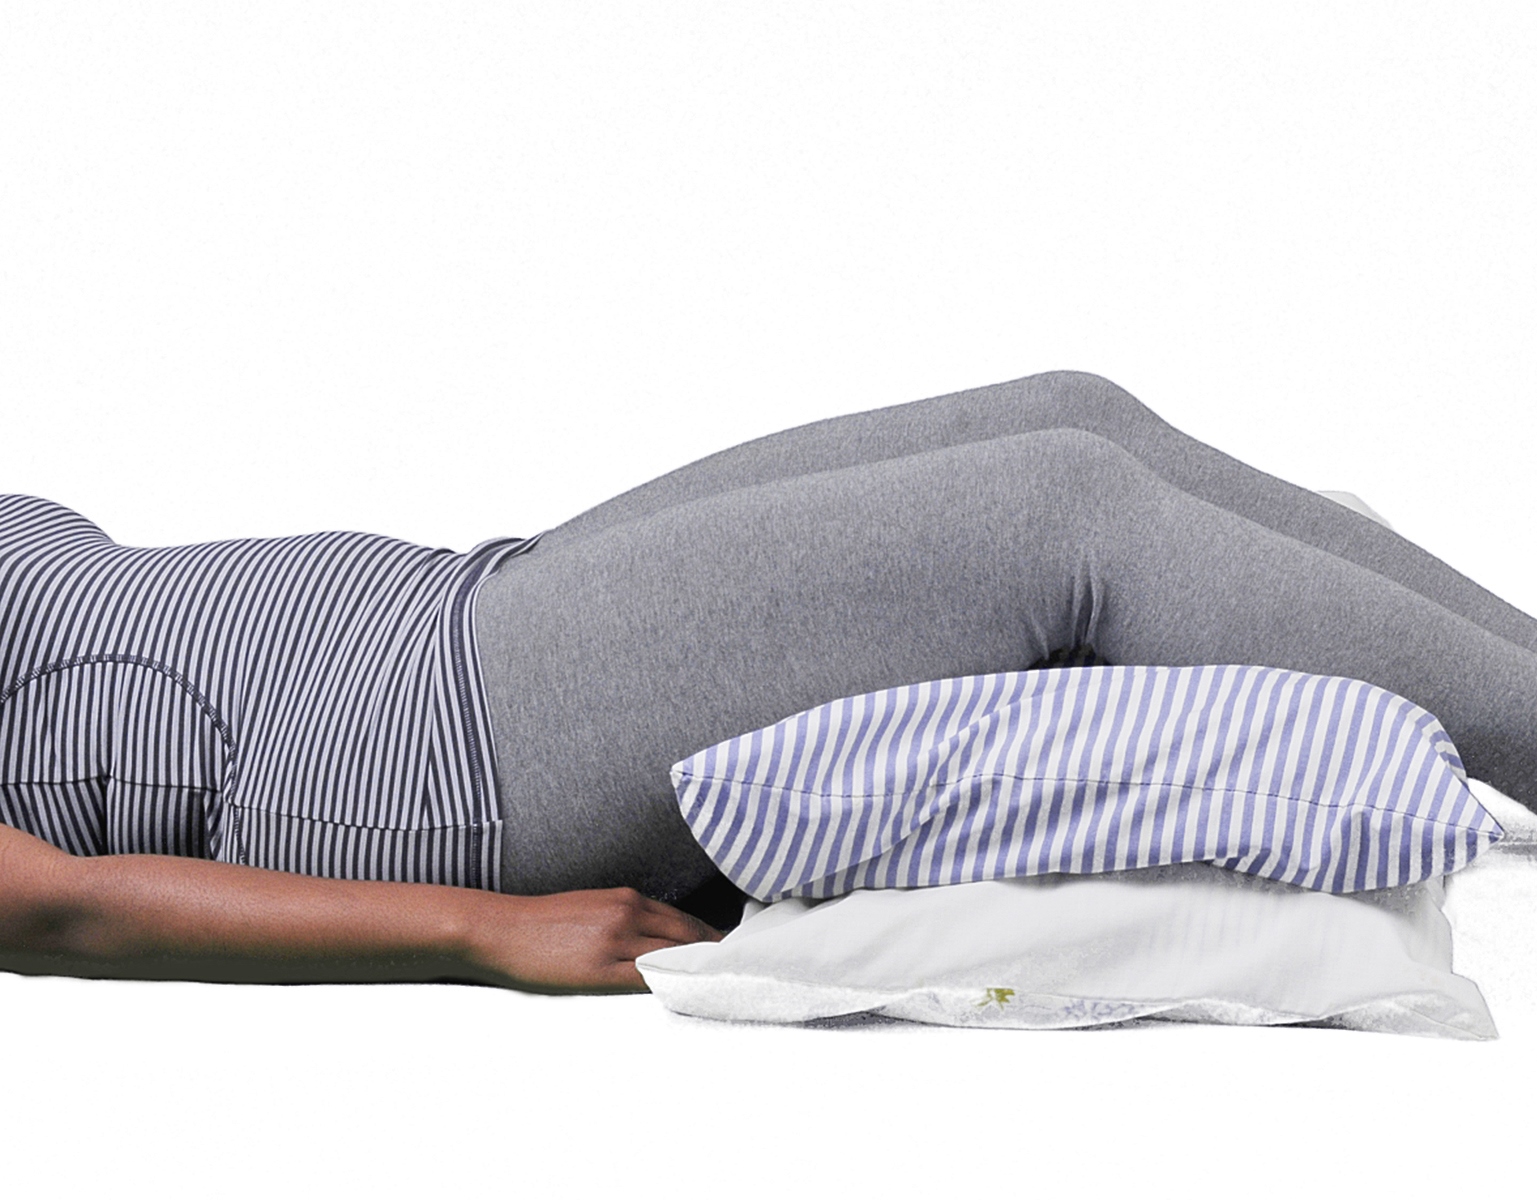 sleep with pillow under lower back